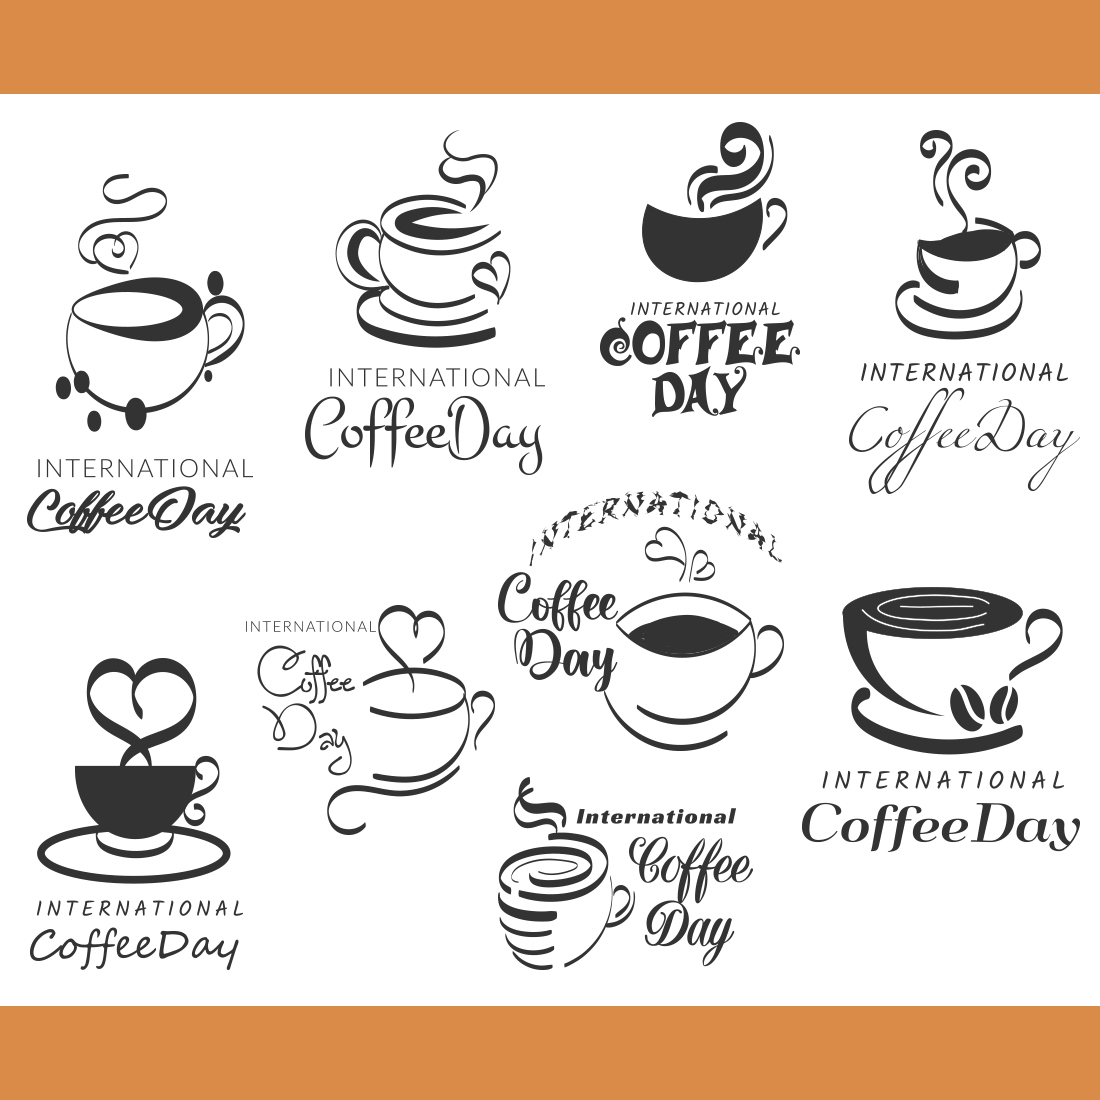 9 Happy International Day Of Coffee Preview Image.